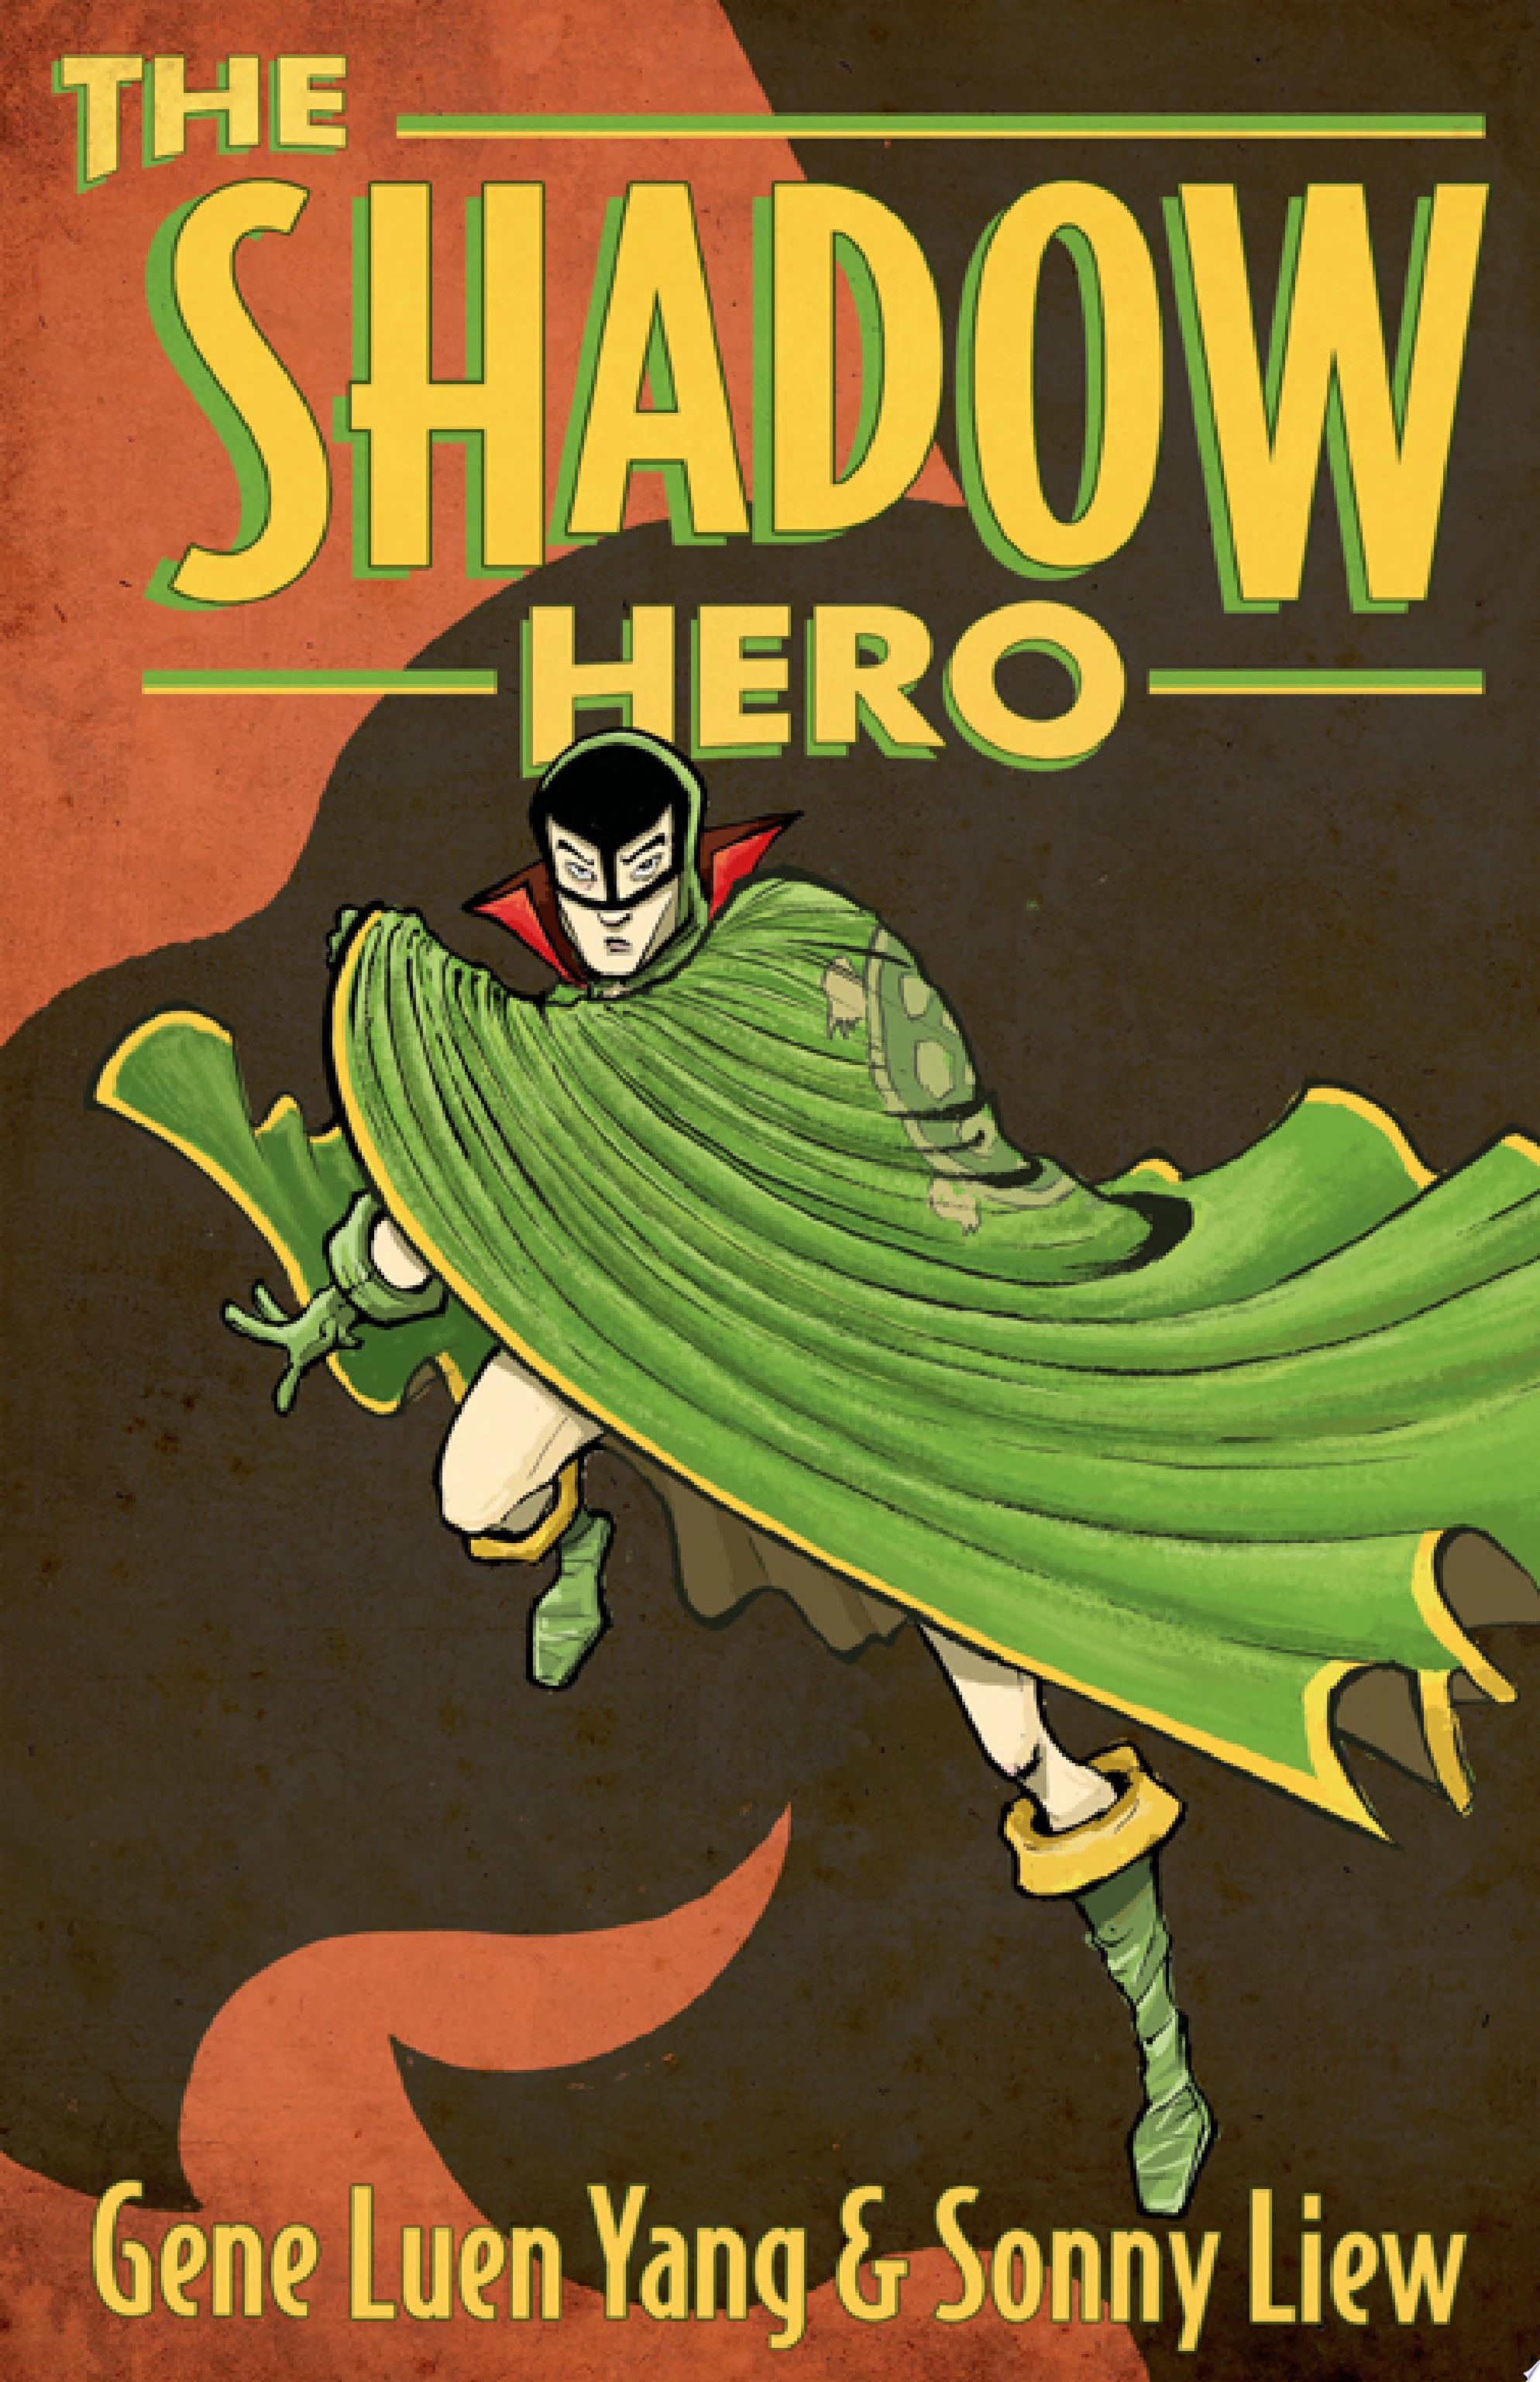 Image for "The Shadow Hero"